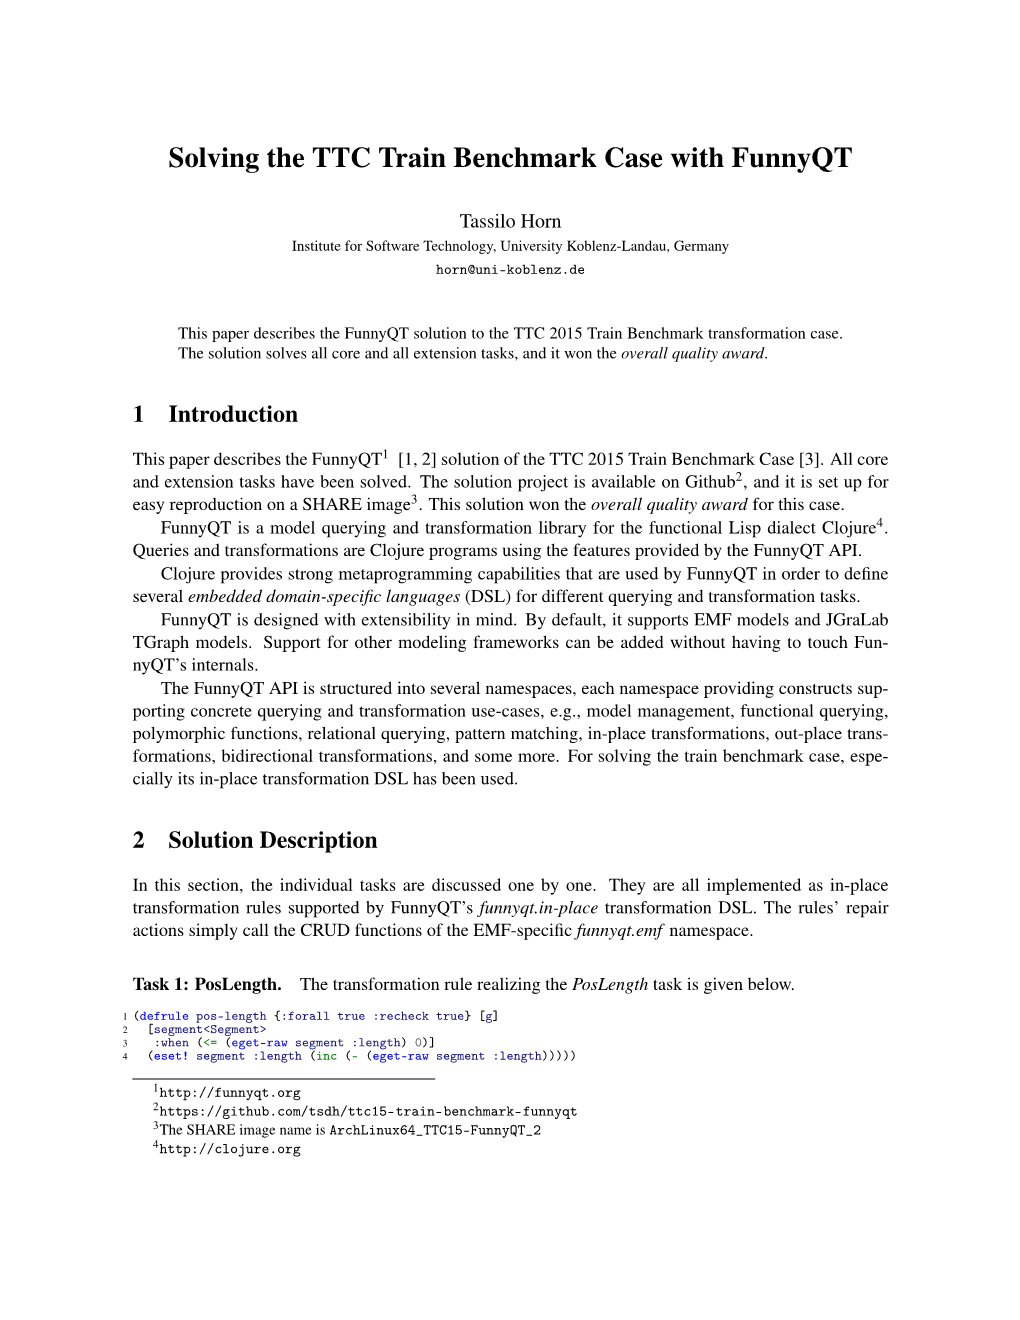 Solving the TTC Train Benchmark Case with Funnyqt